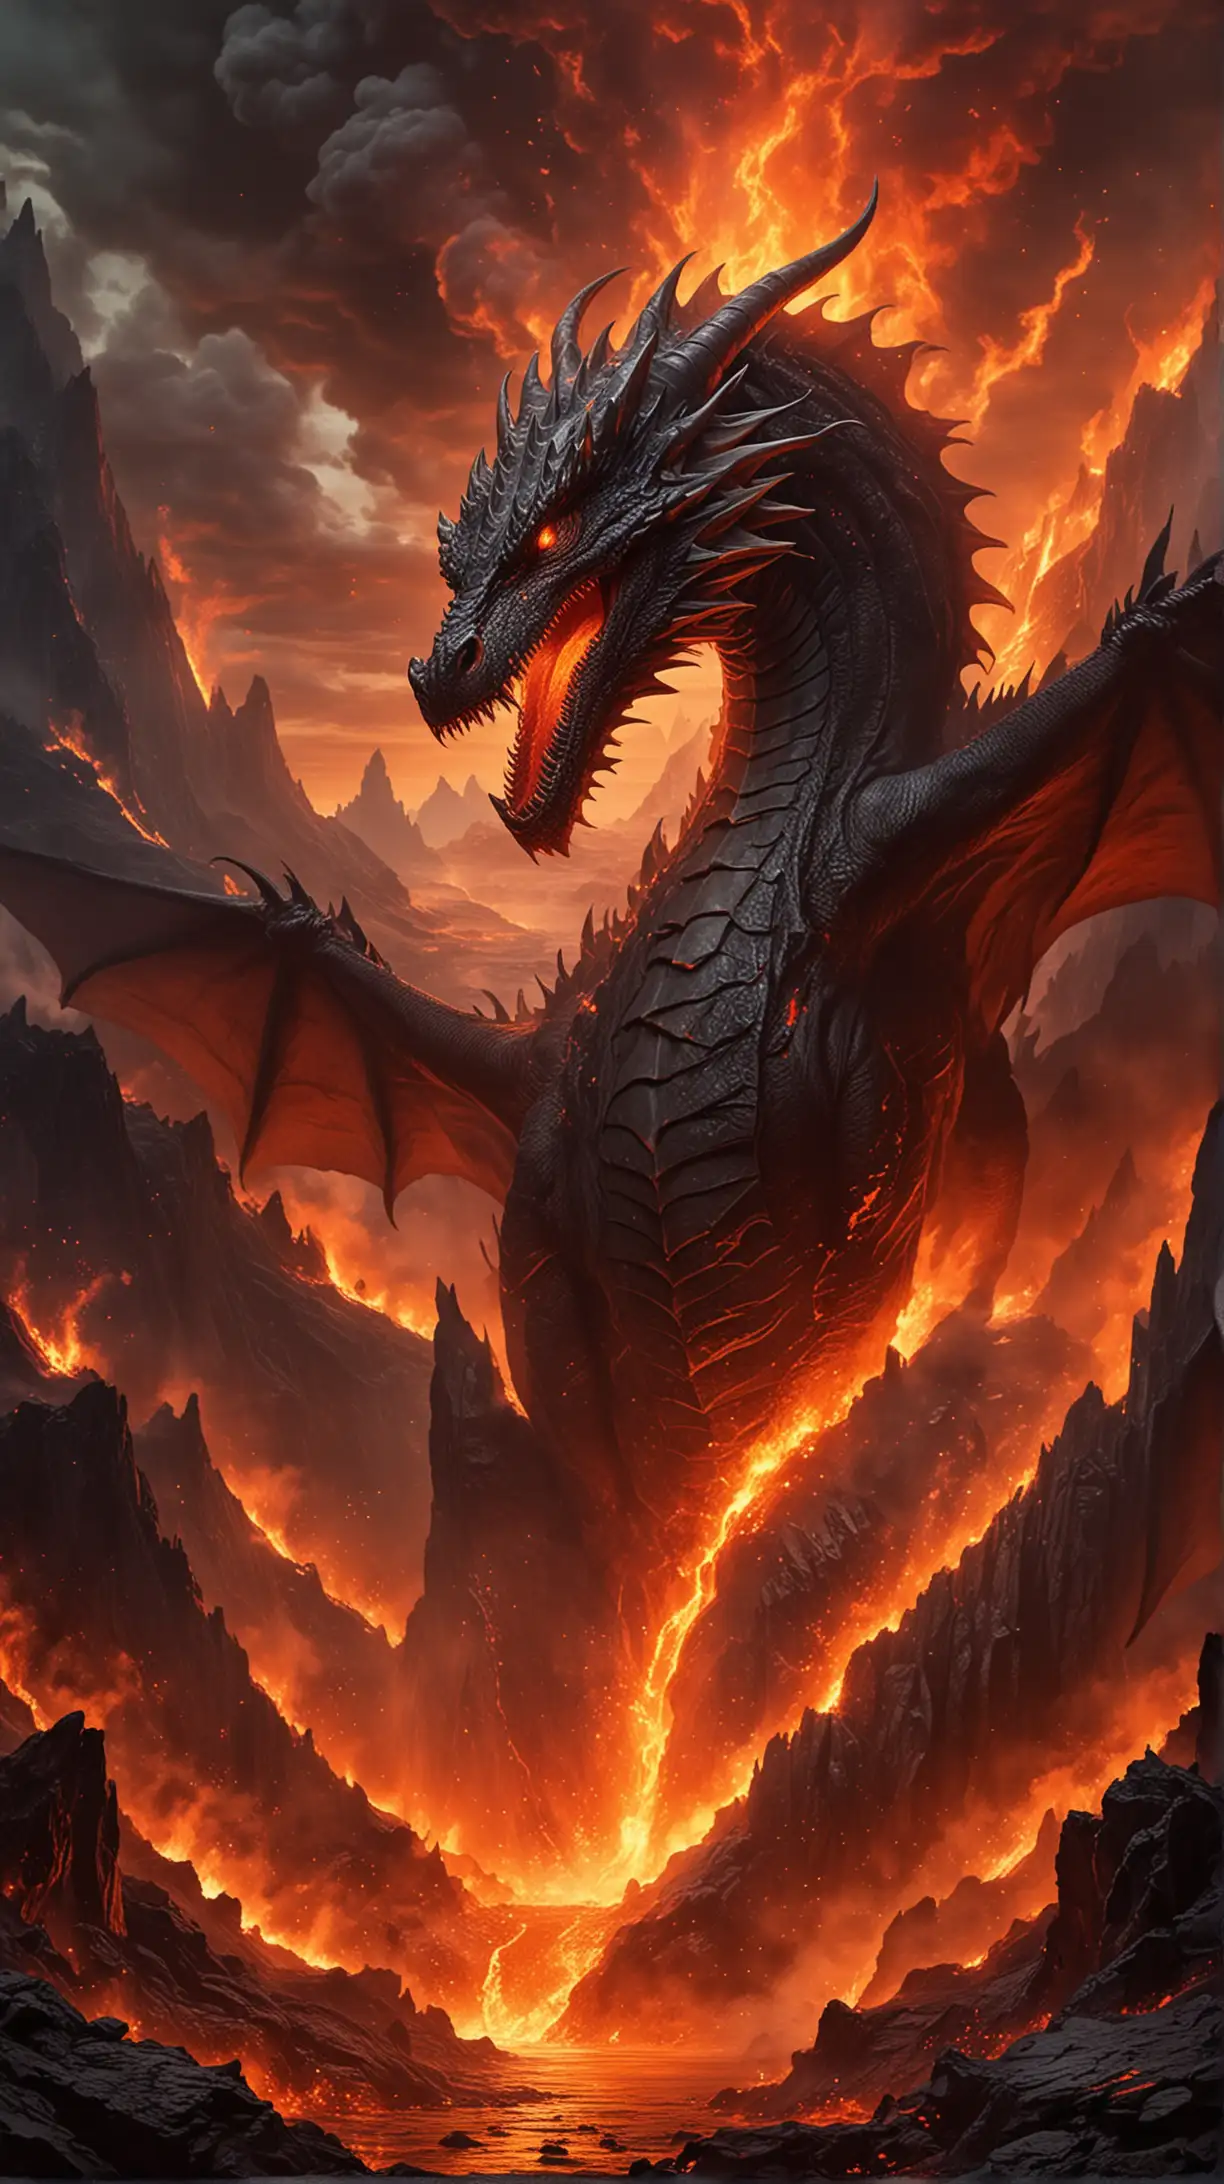 "A terrifying dragon slumbering within the heart of an ancient volcano, its fiery breath simmering just beneath the surface of the molten lava."